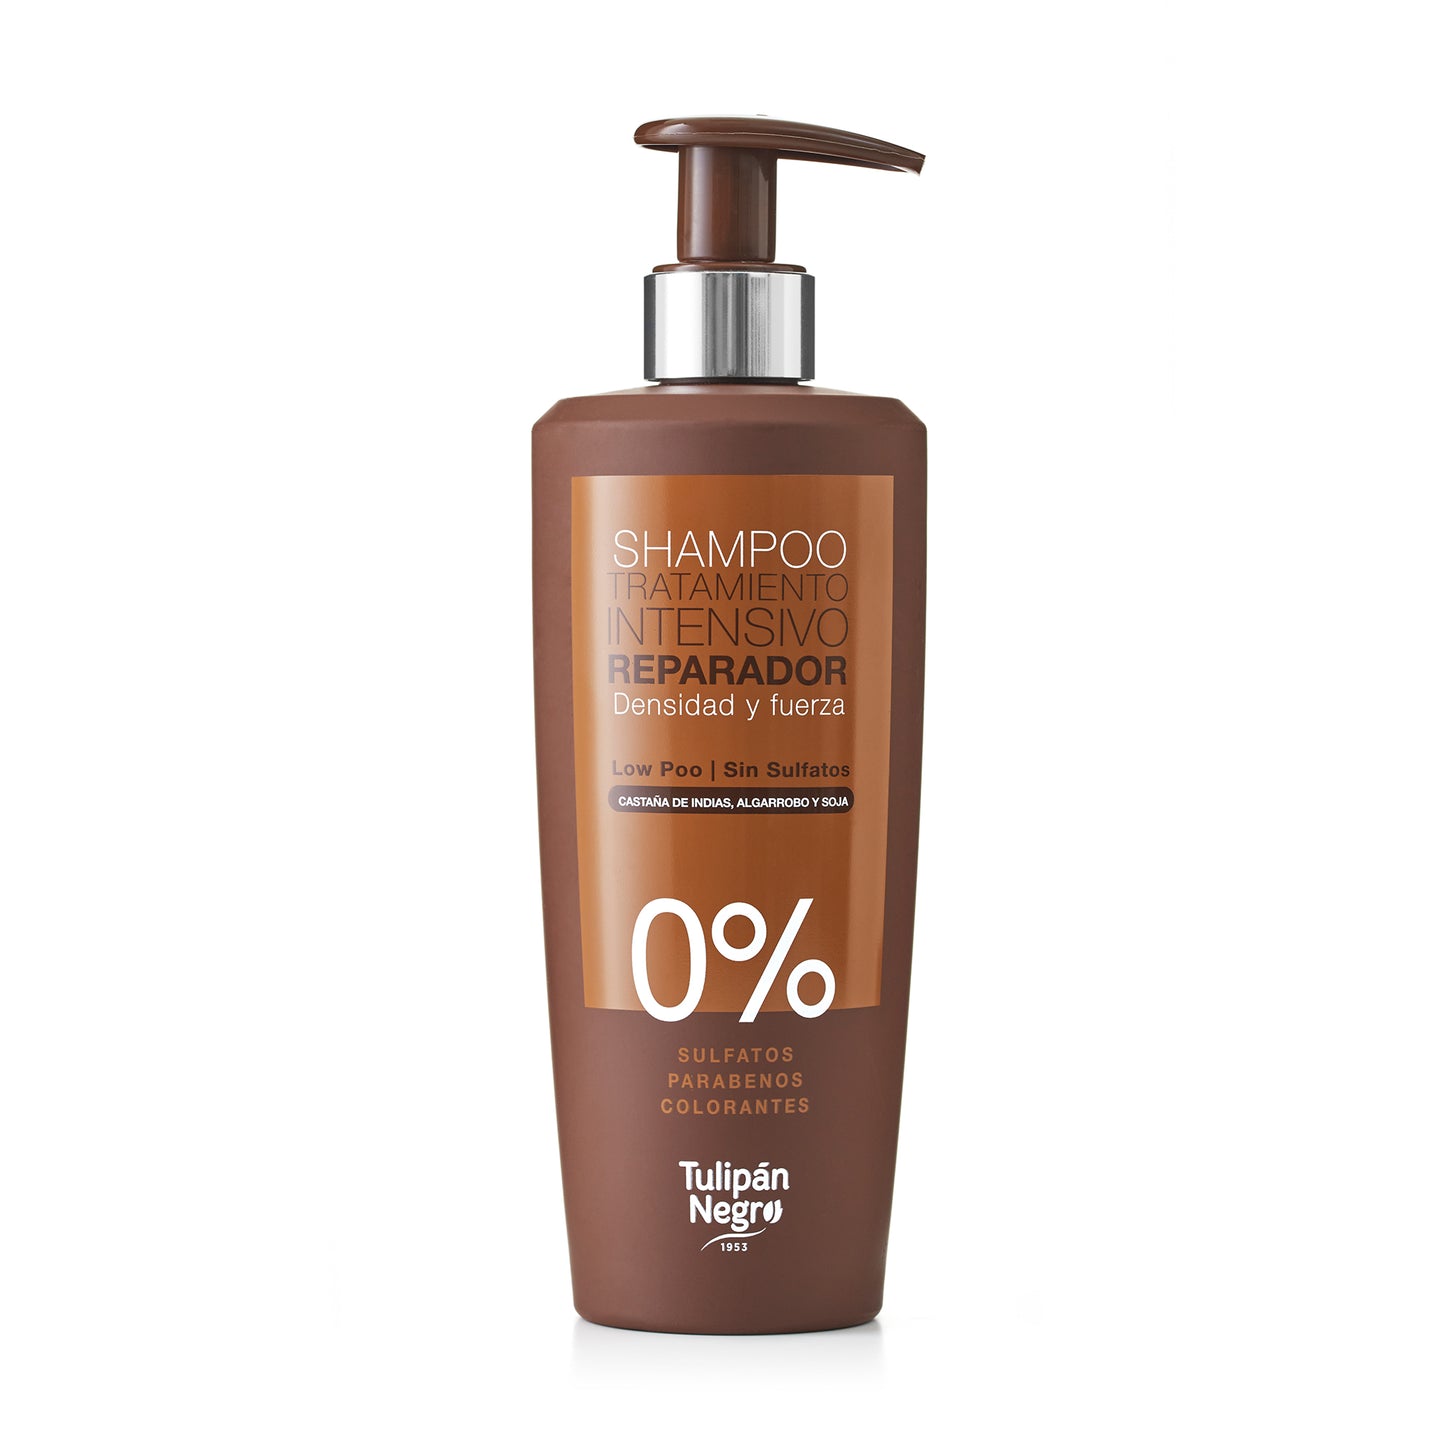 Tulipan Negro Shampoo Without Sulphates Intensive Repair - 500ml